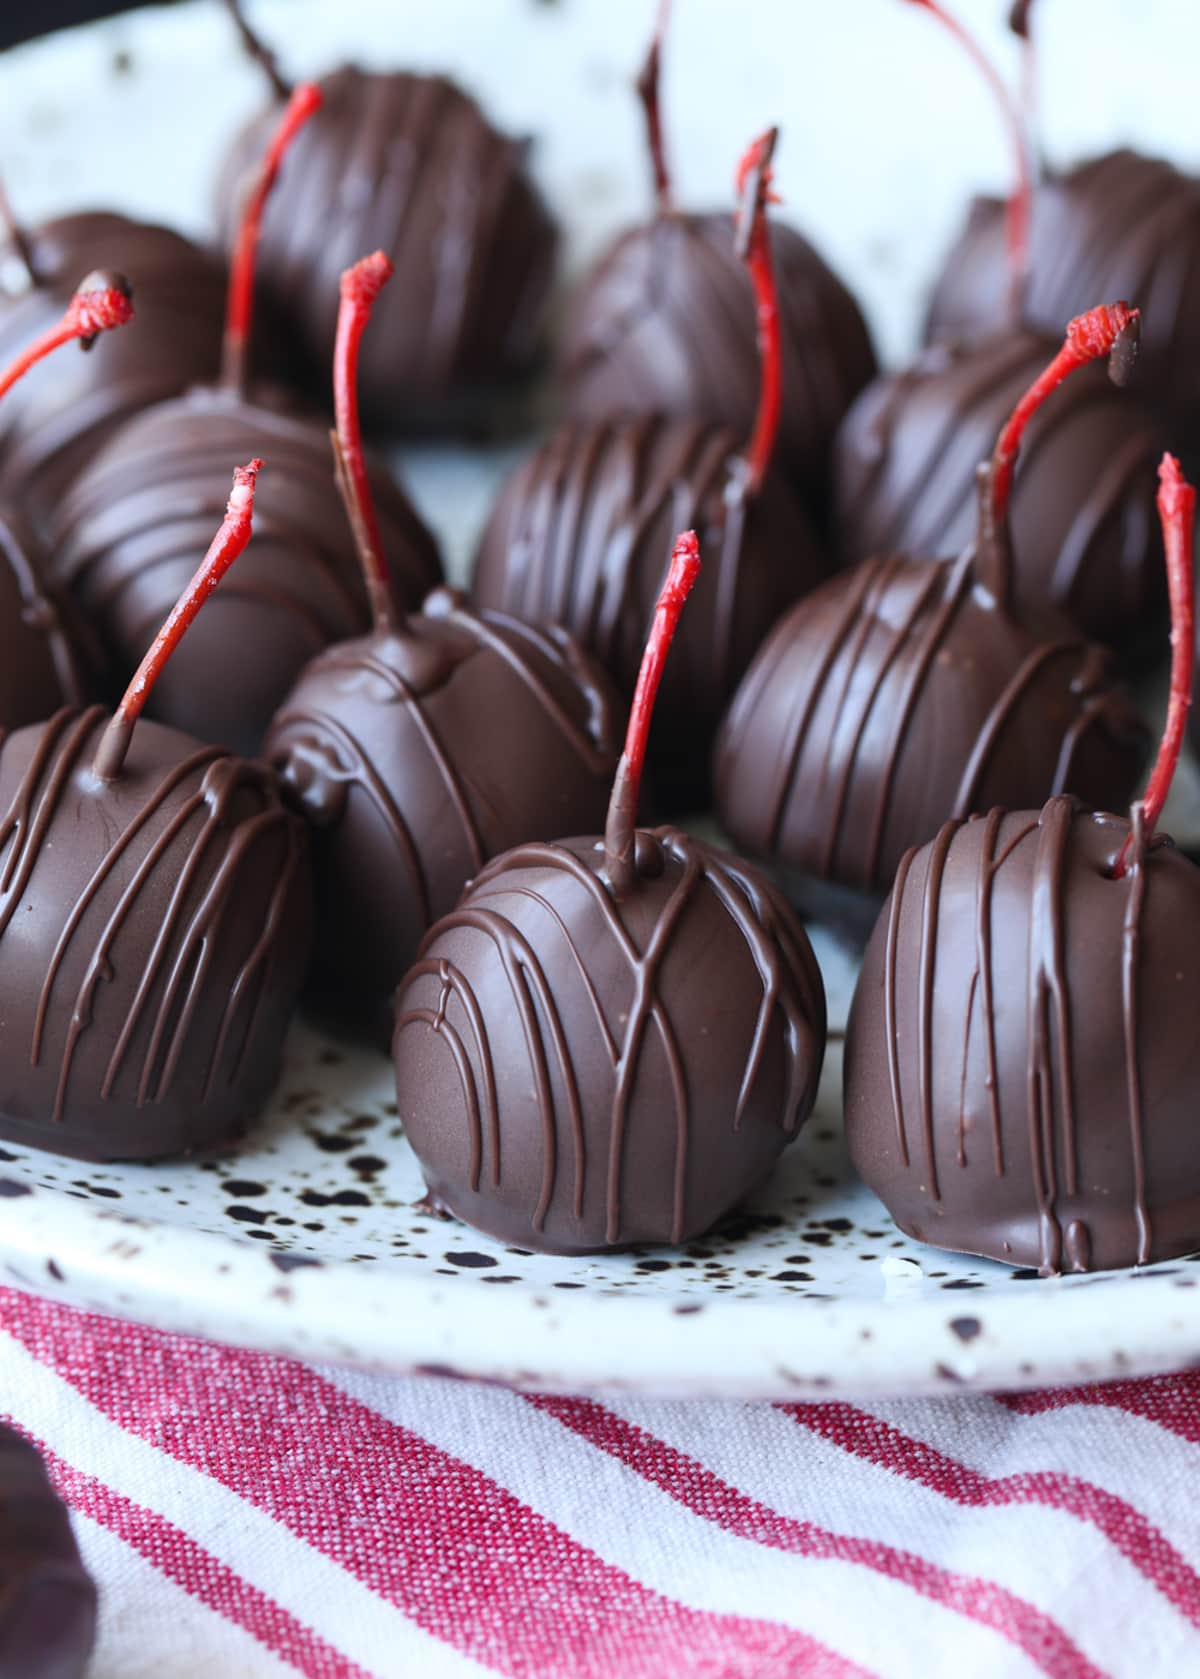 Chocolate covered cherries on a stoneware plate with the red stems peeking out the top.